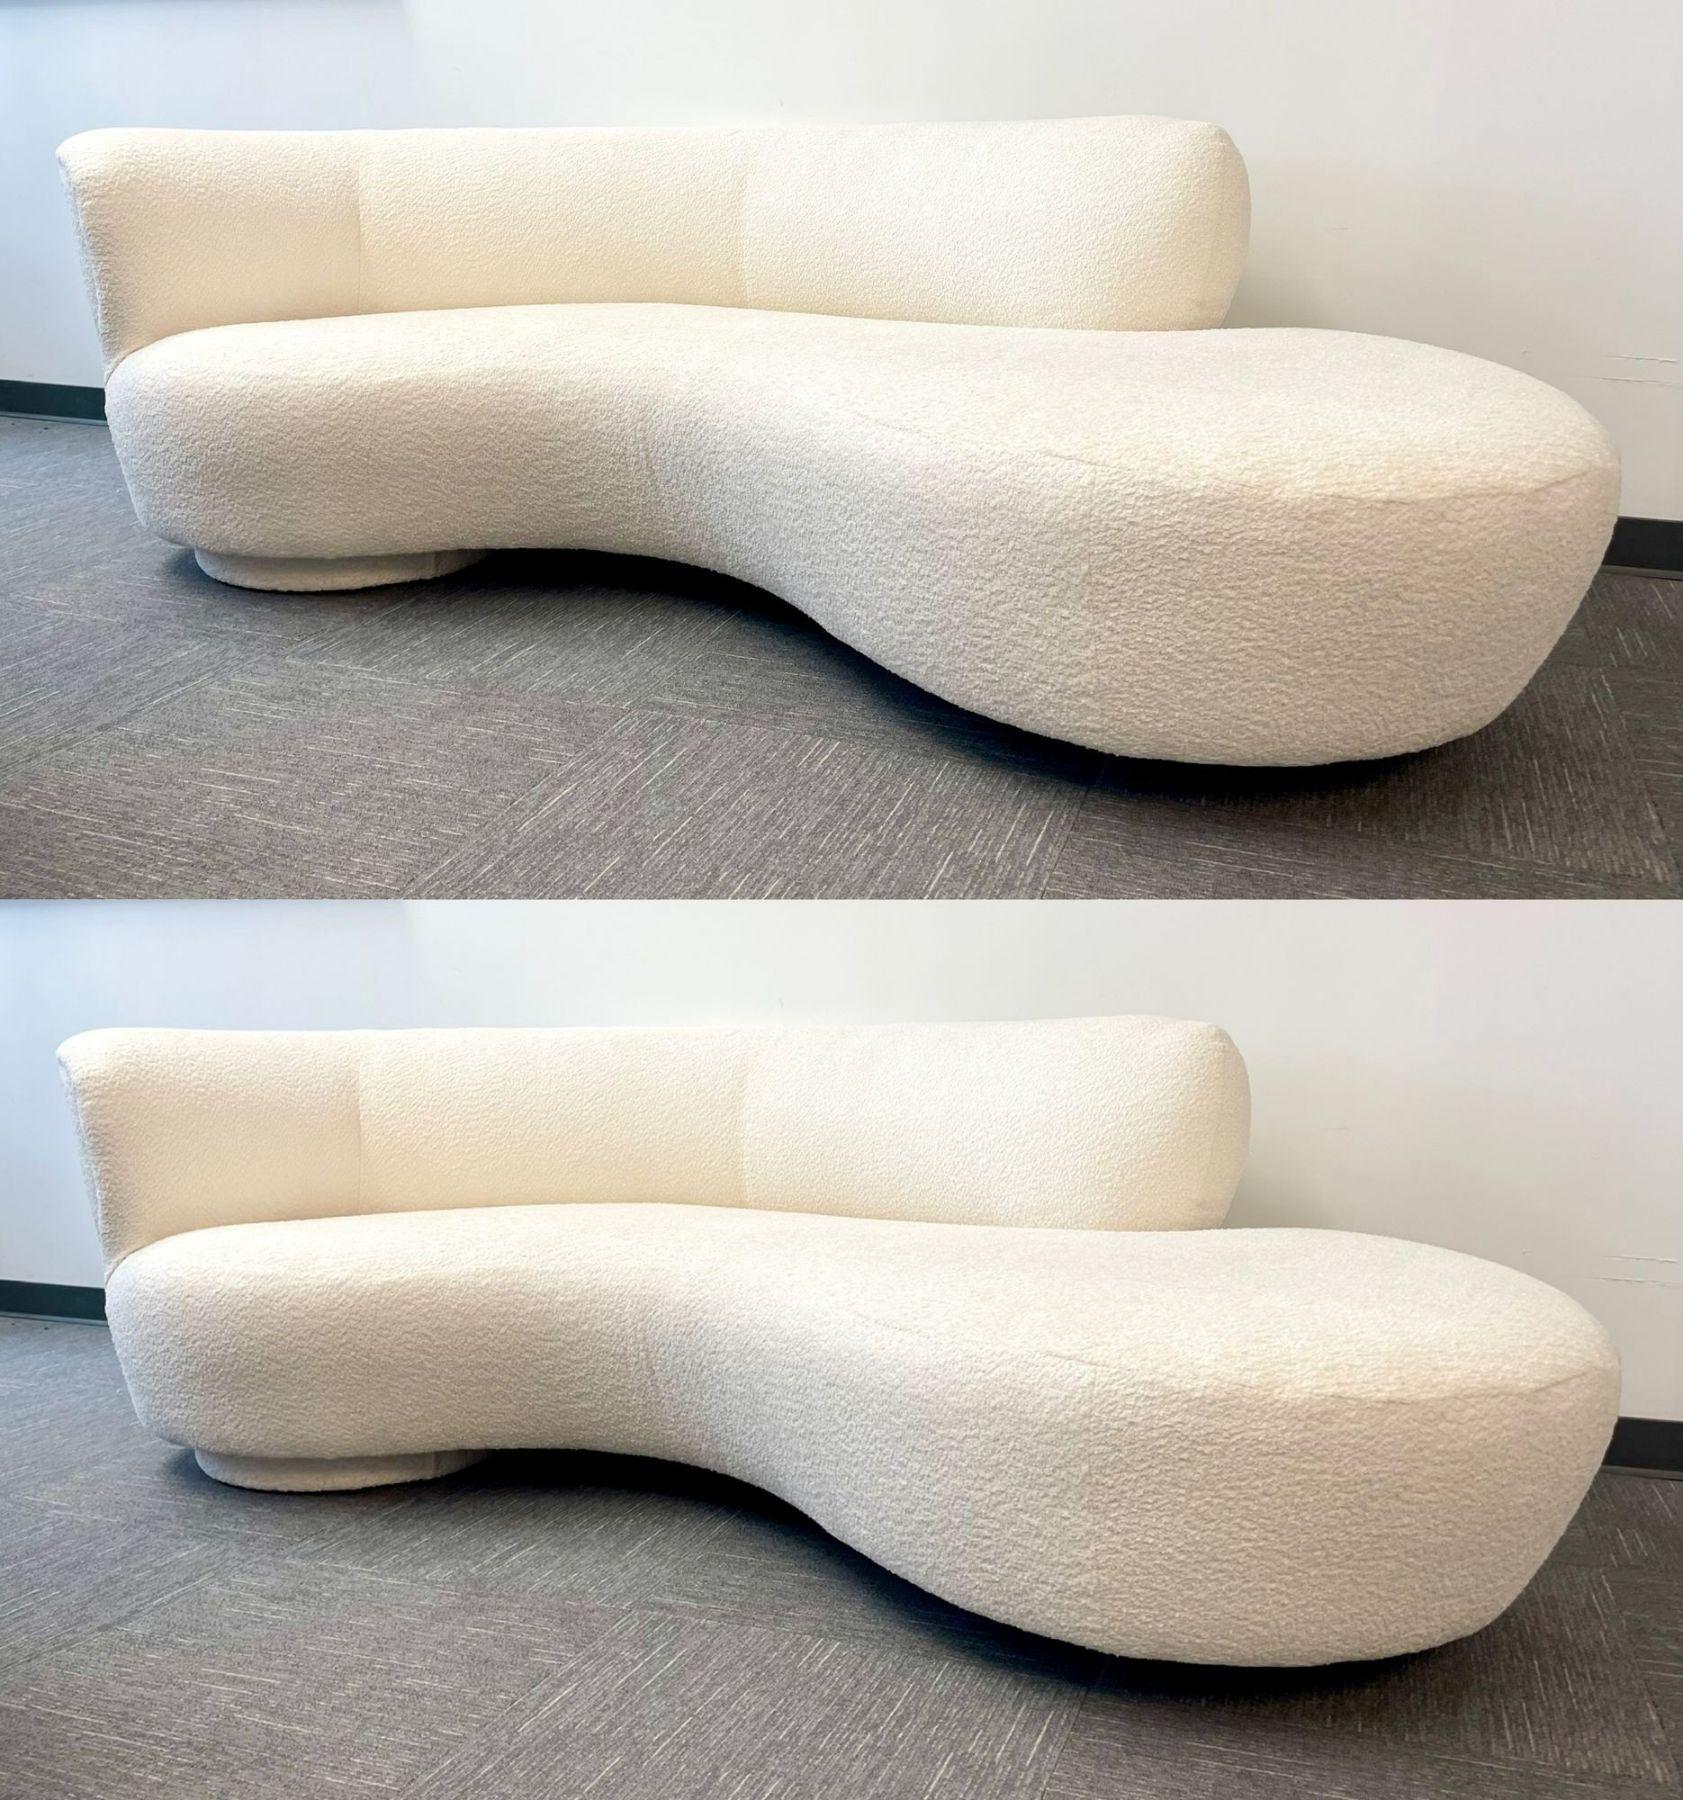 Pair of Vladimir Kagan for Weiman Cloud Sofas, Mid-Century Modern, Boucle
 
Vladimir Kagan's iconic mid-century deisgn in it's original form finished in a brand new white boucle upholstery. Each sofa consists of the signature kidney shape upper